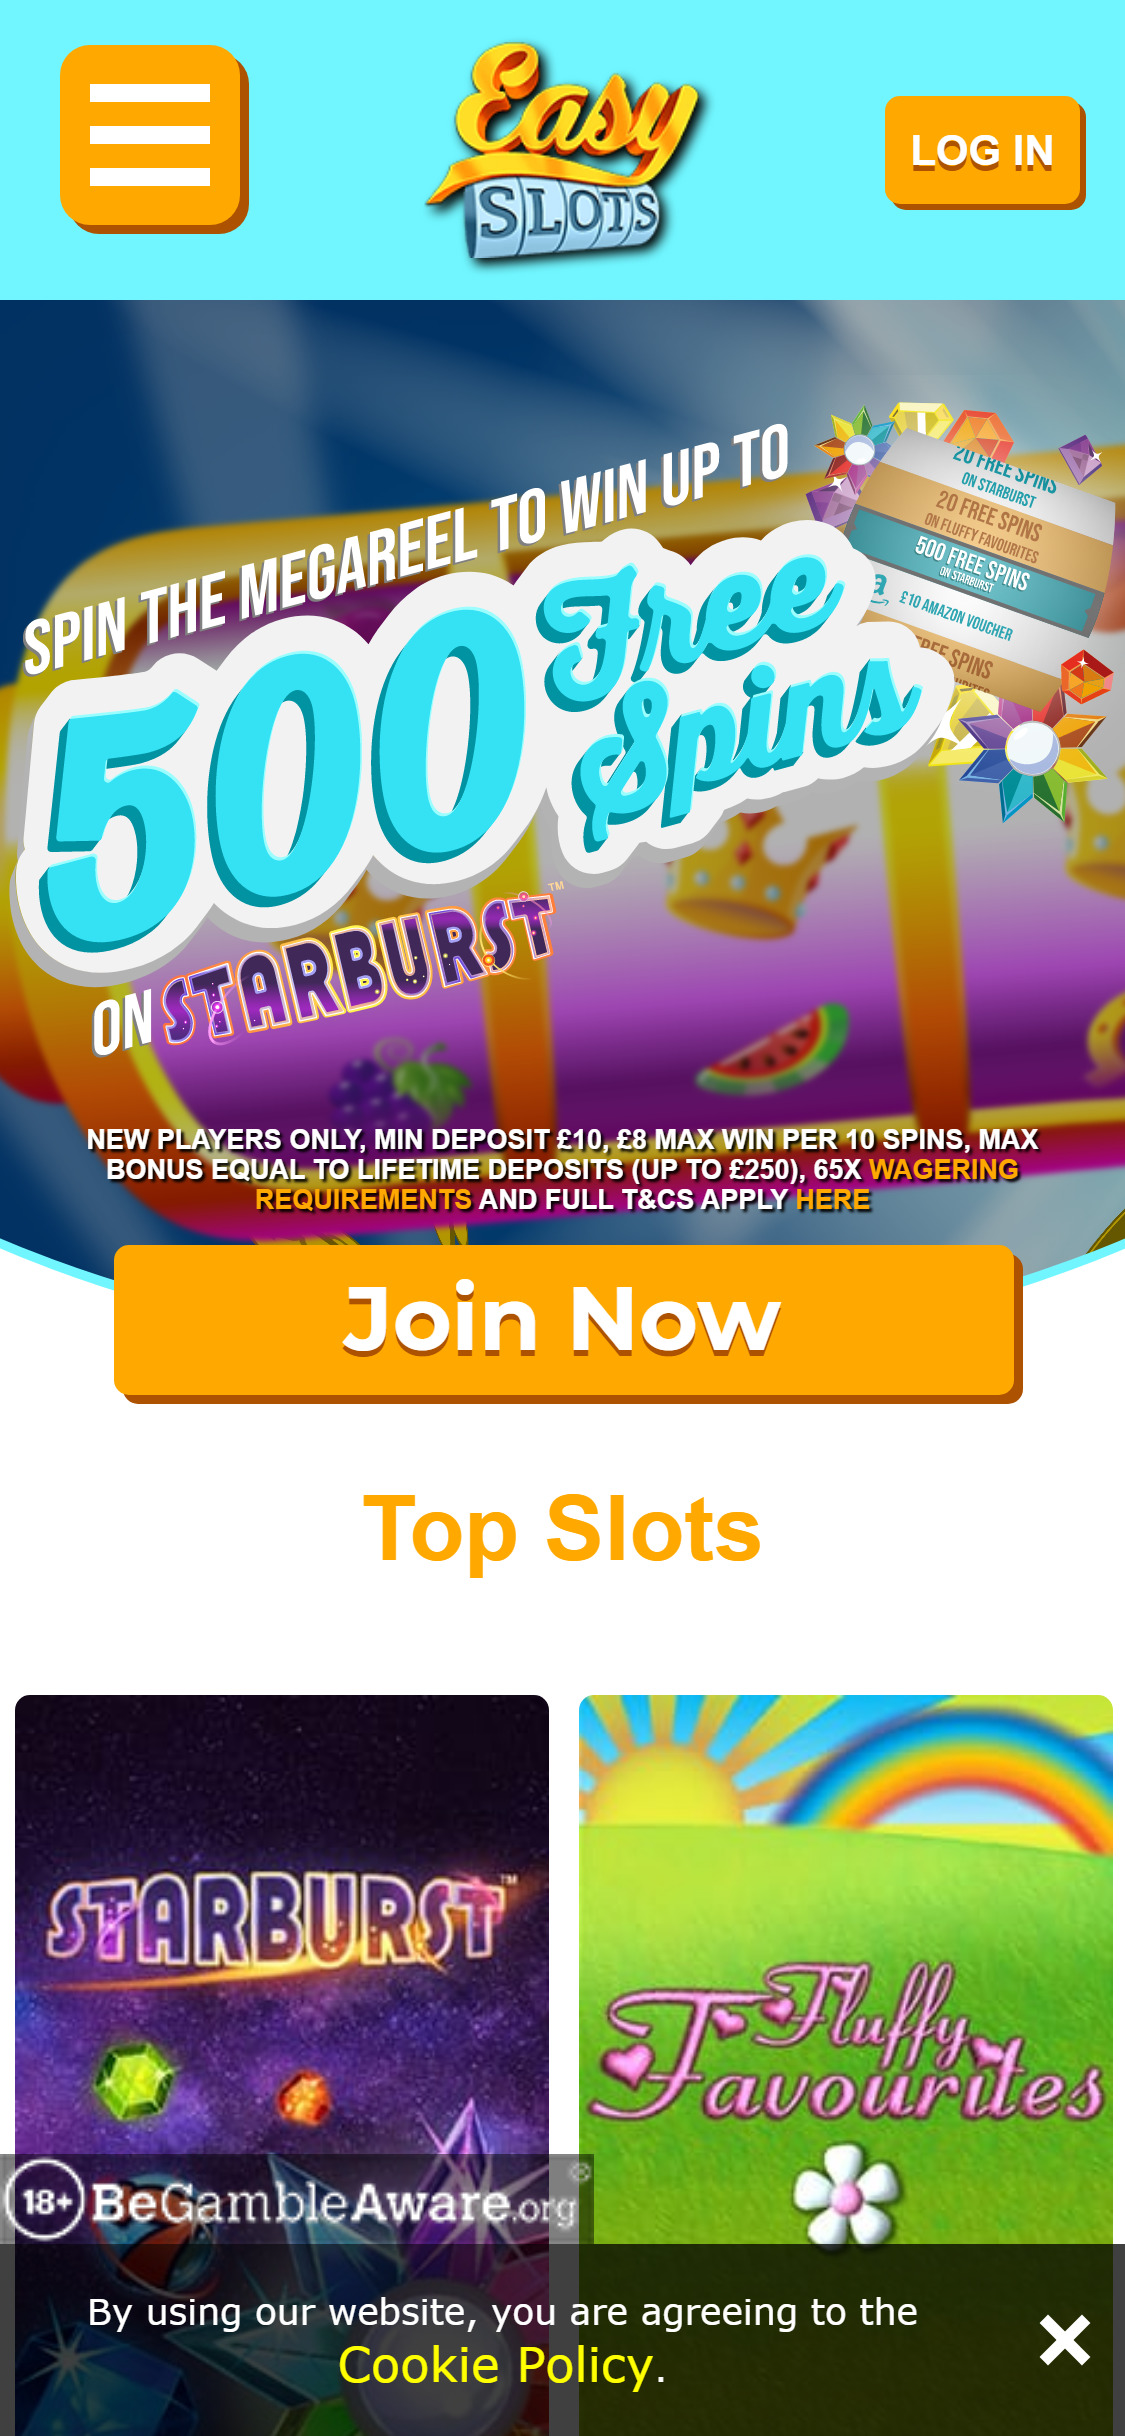 Easy Slots Casino Mobile Review